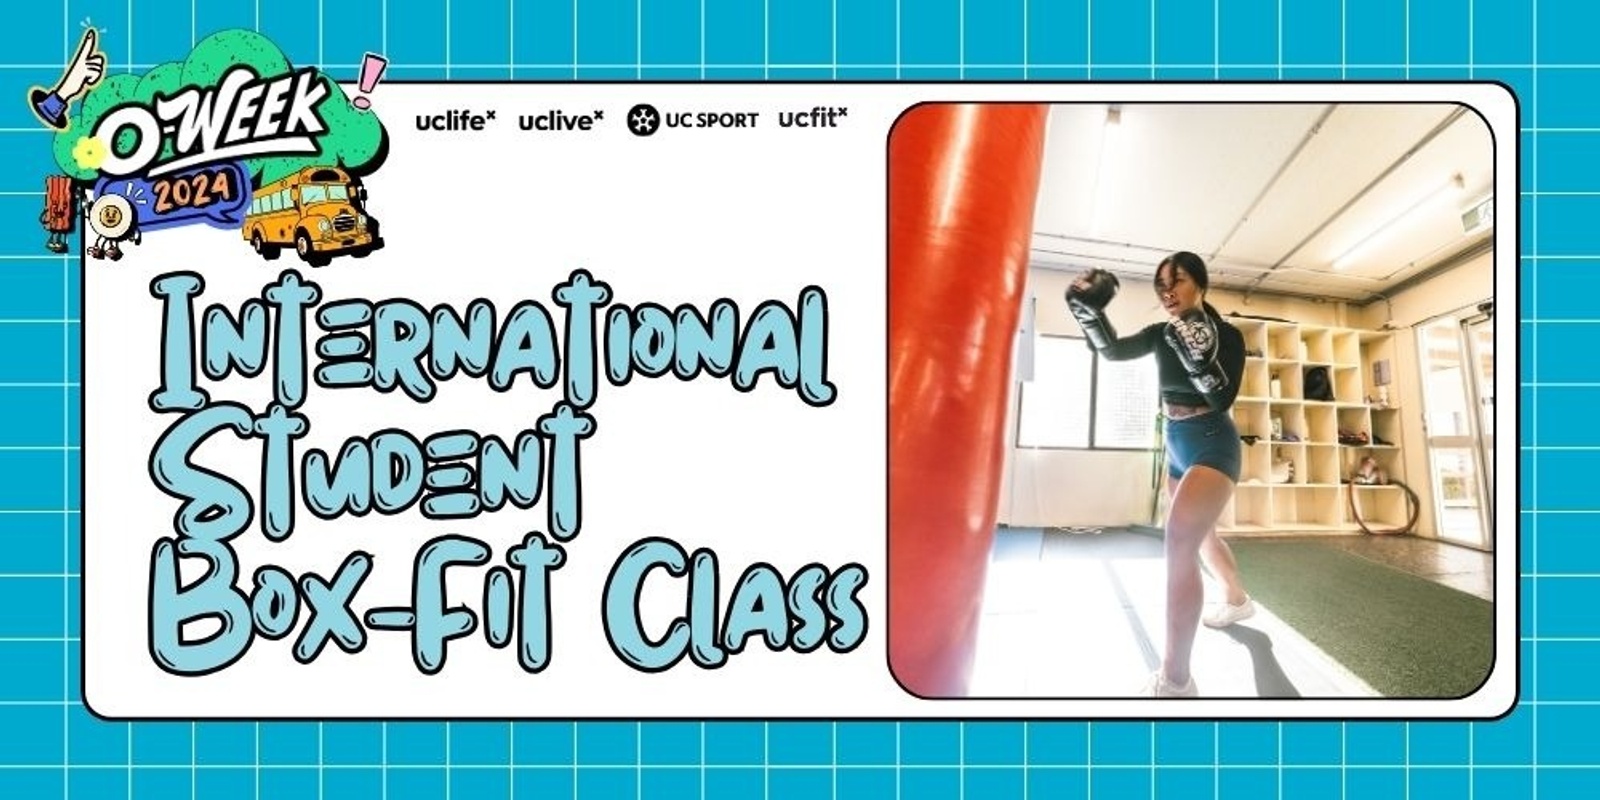 Banner image for International Student Box-Fit Class